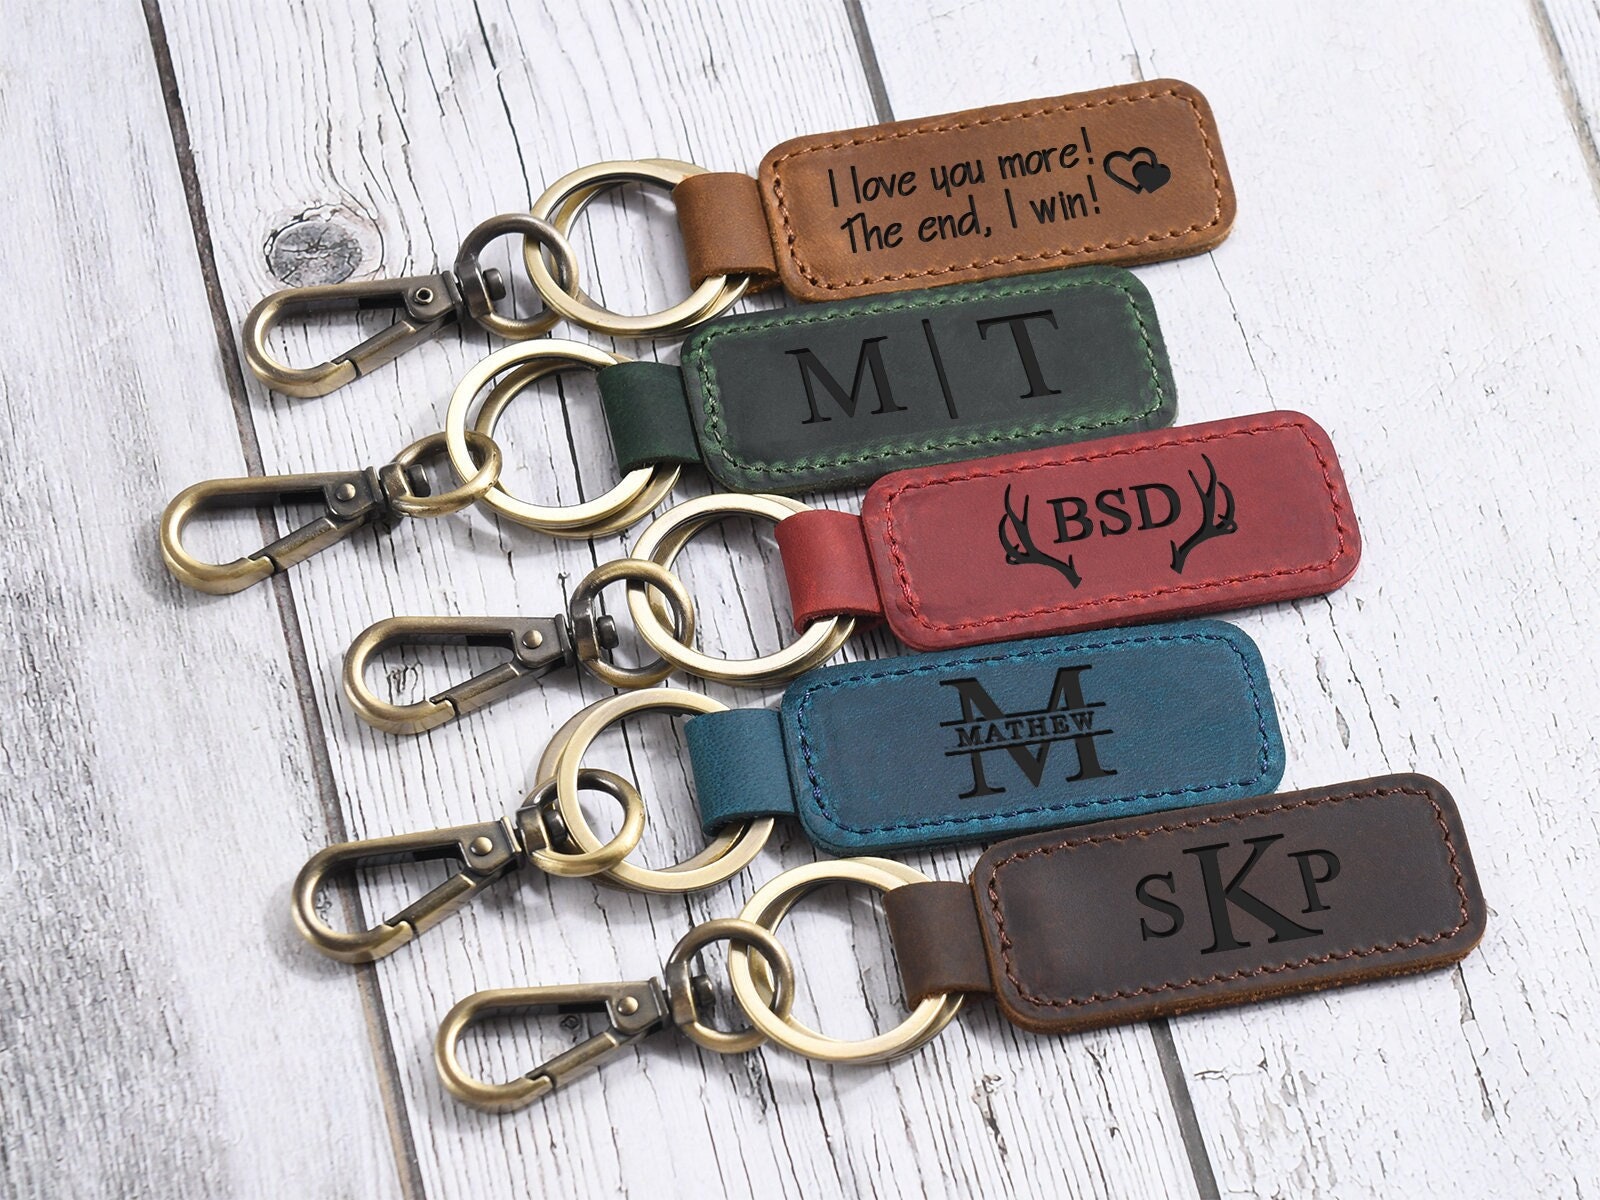 WatchMeWorld Personalized Leather Key Chain, Hand Stamped Personalized Key Fob, Keychain Gift, Personalized Gift Idea, Anniversary Gift, Wedding Gift Beige Tan /